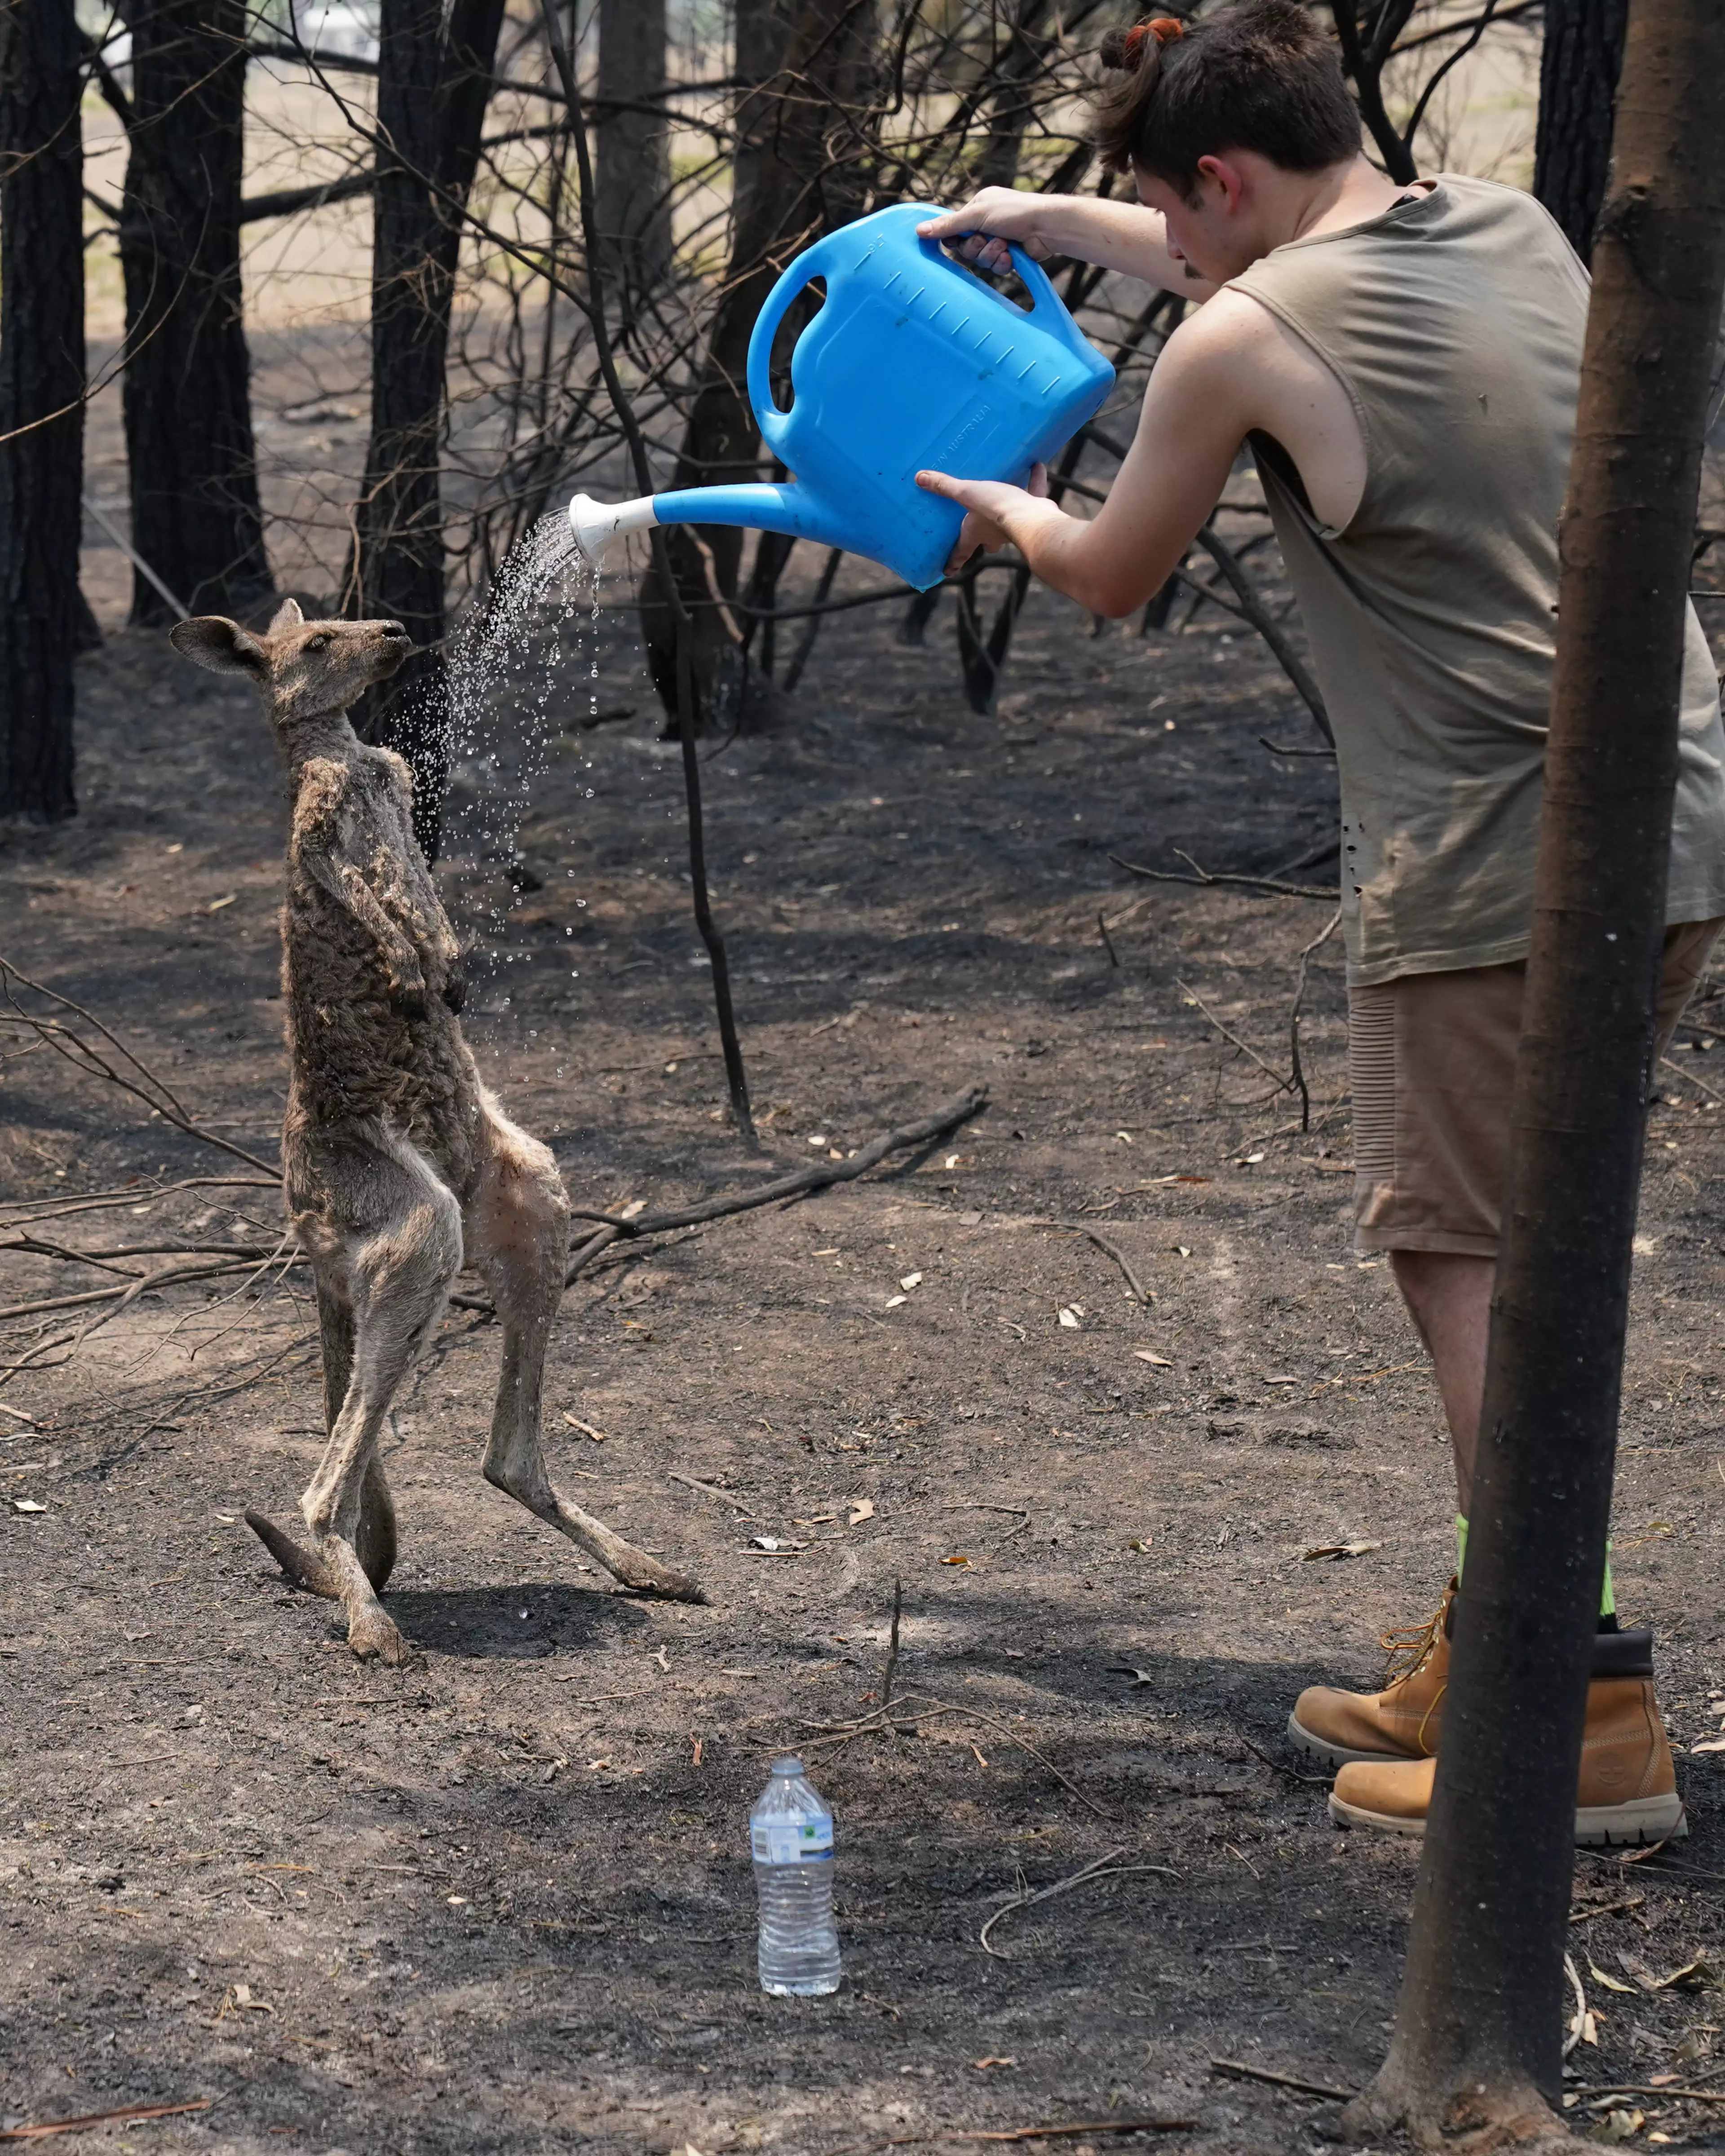 The kangaroo is one of the countless animals harmed by the fires.